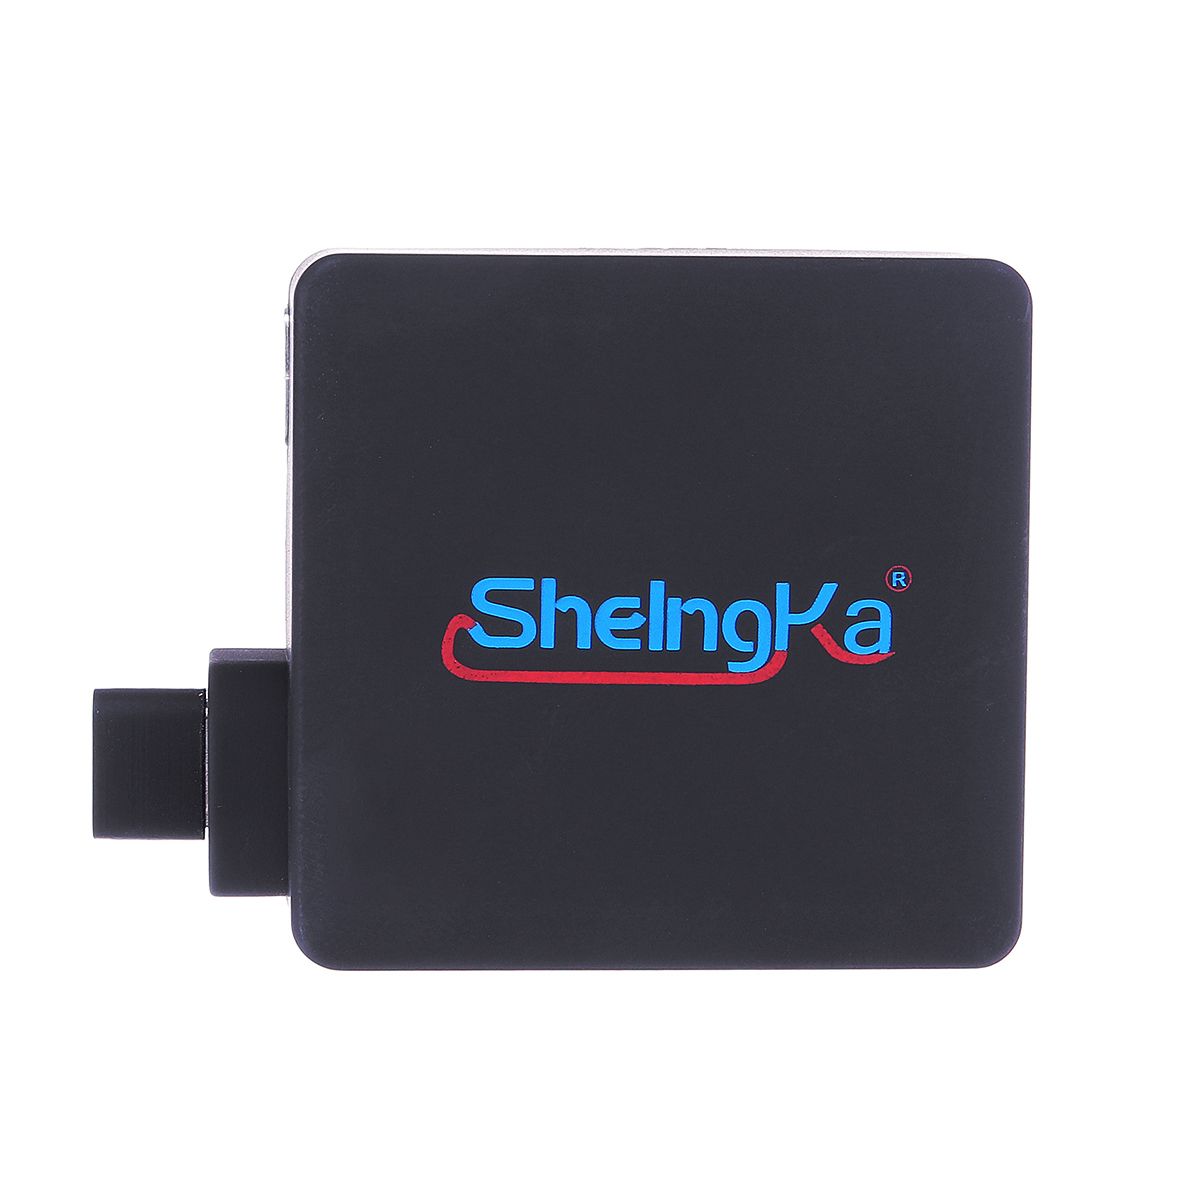 Sheingka-FLW221-2300mAh-Rechargeable-External-Side-Type-C-Battery-for-GoPro-Hero-7-6-5-Black-Action--1455989